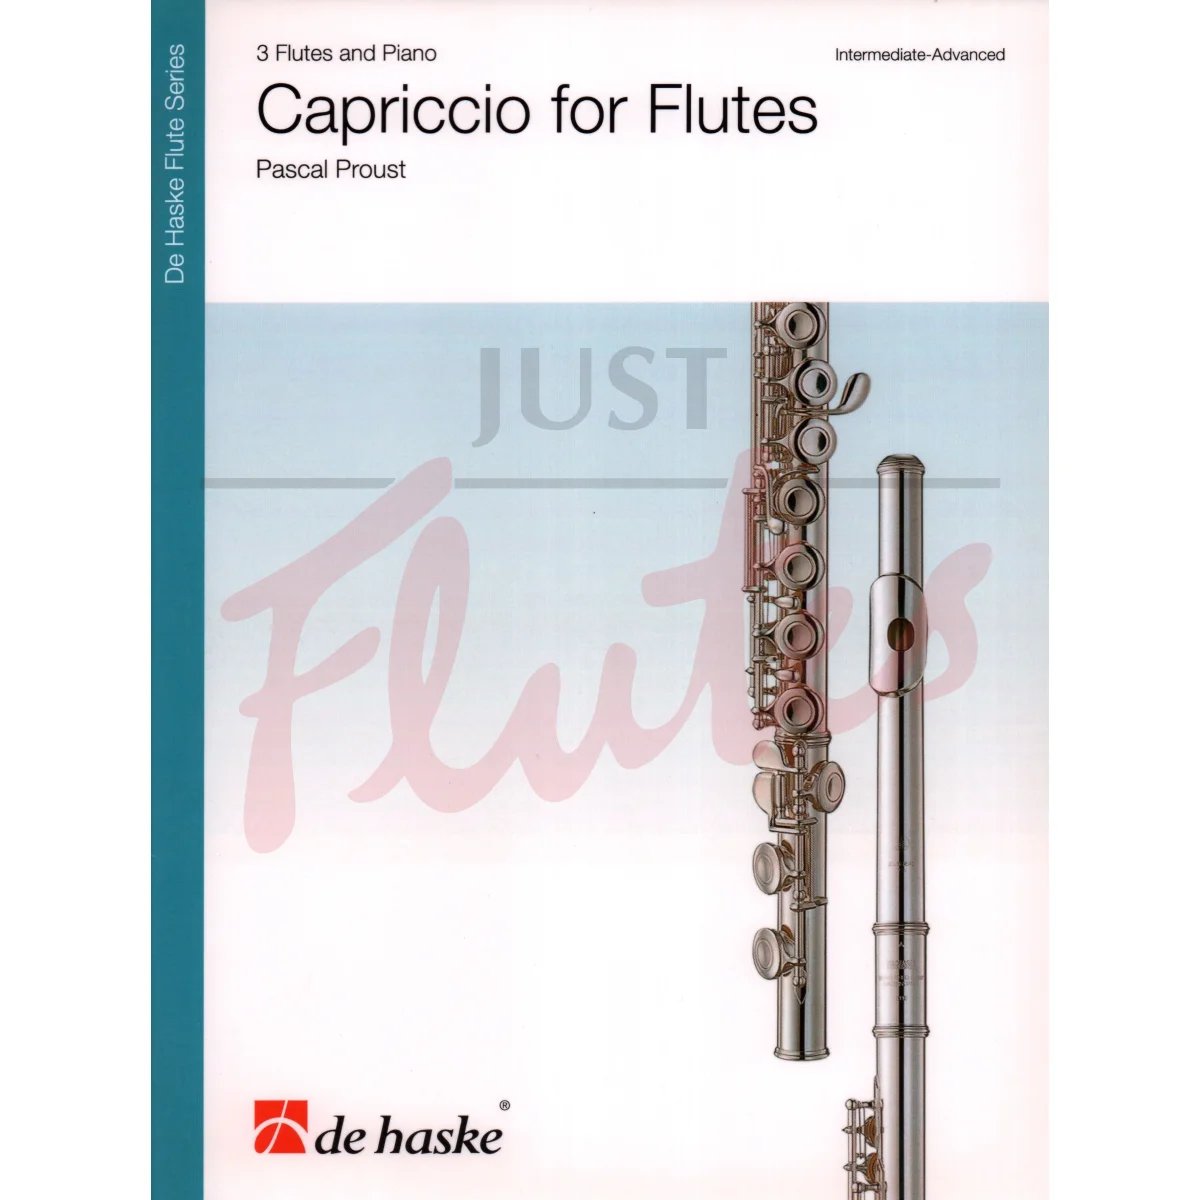 Cappriccio for Flutes for Three Flutes and Piano